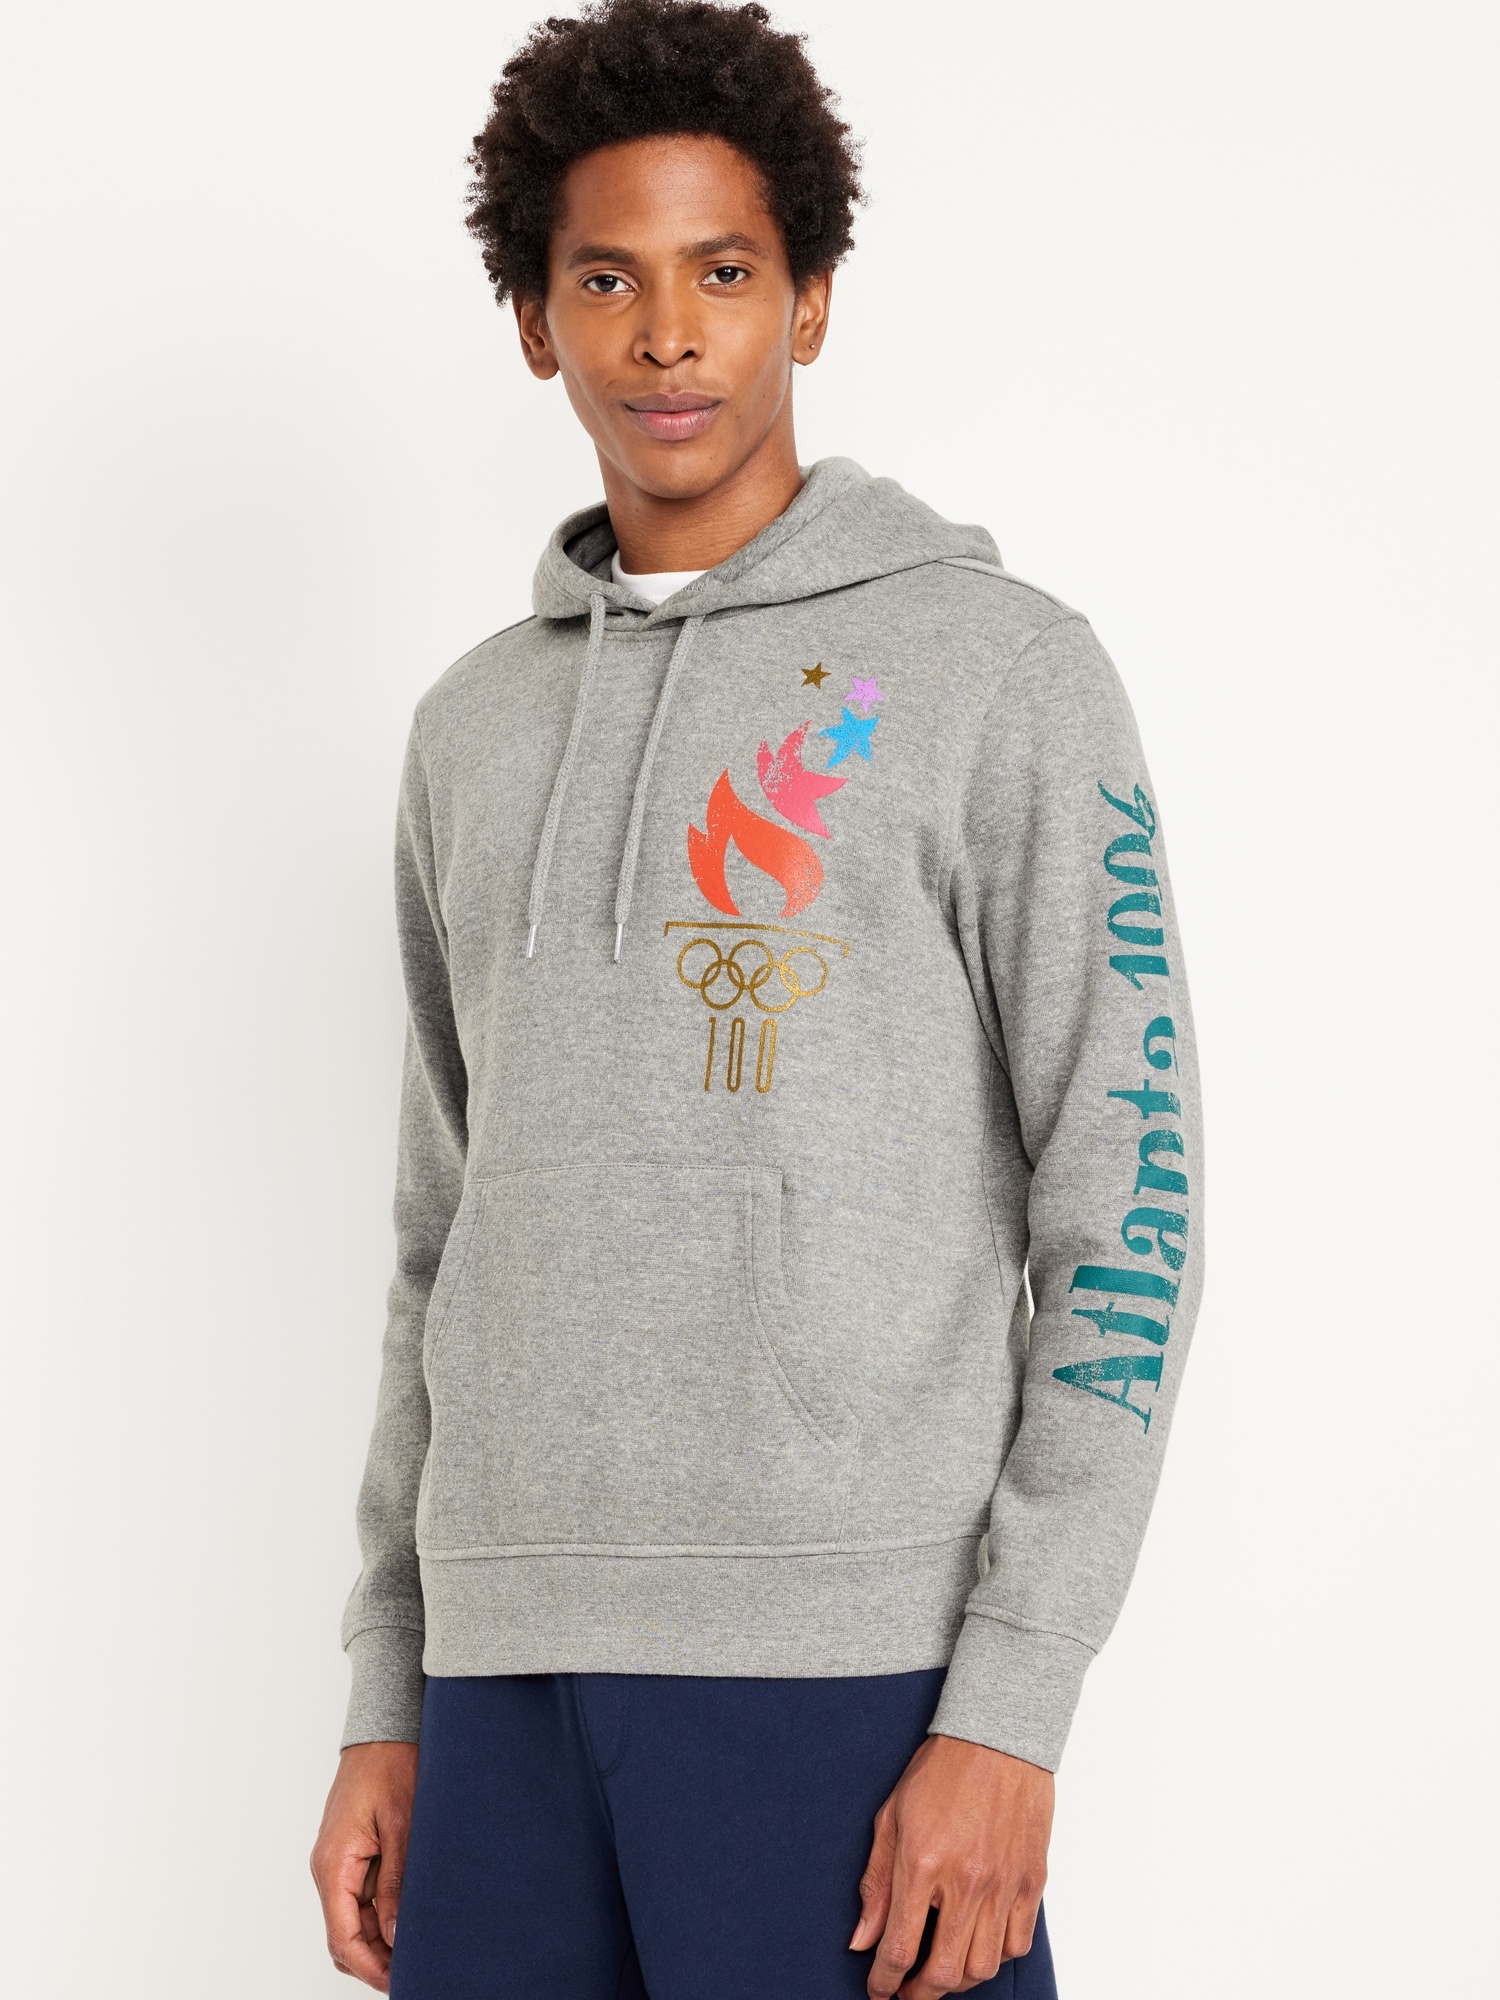 Team USA© Gender-Neutral Pullover Hoodie for Adults